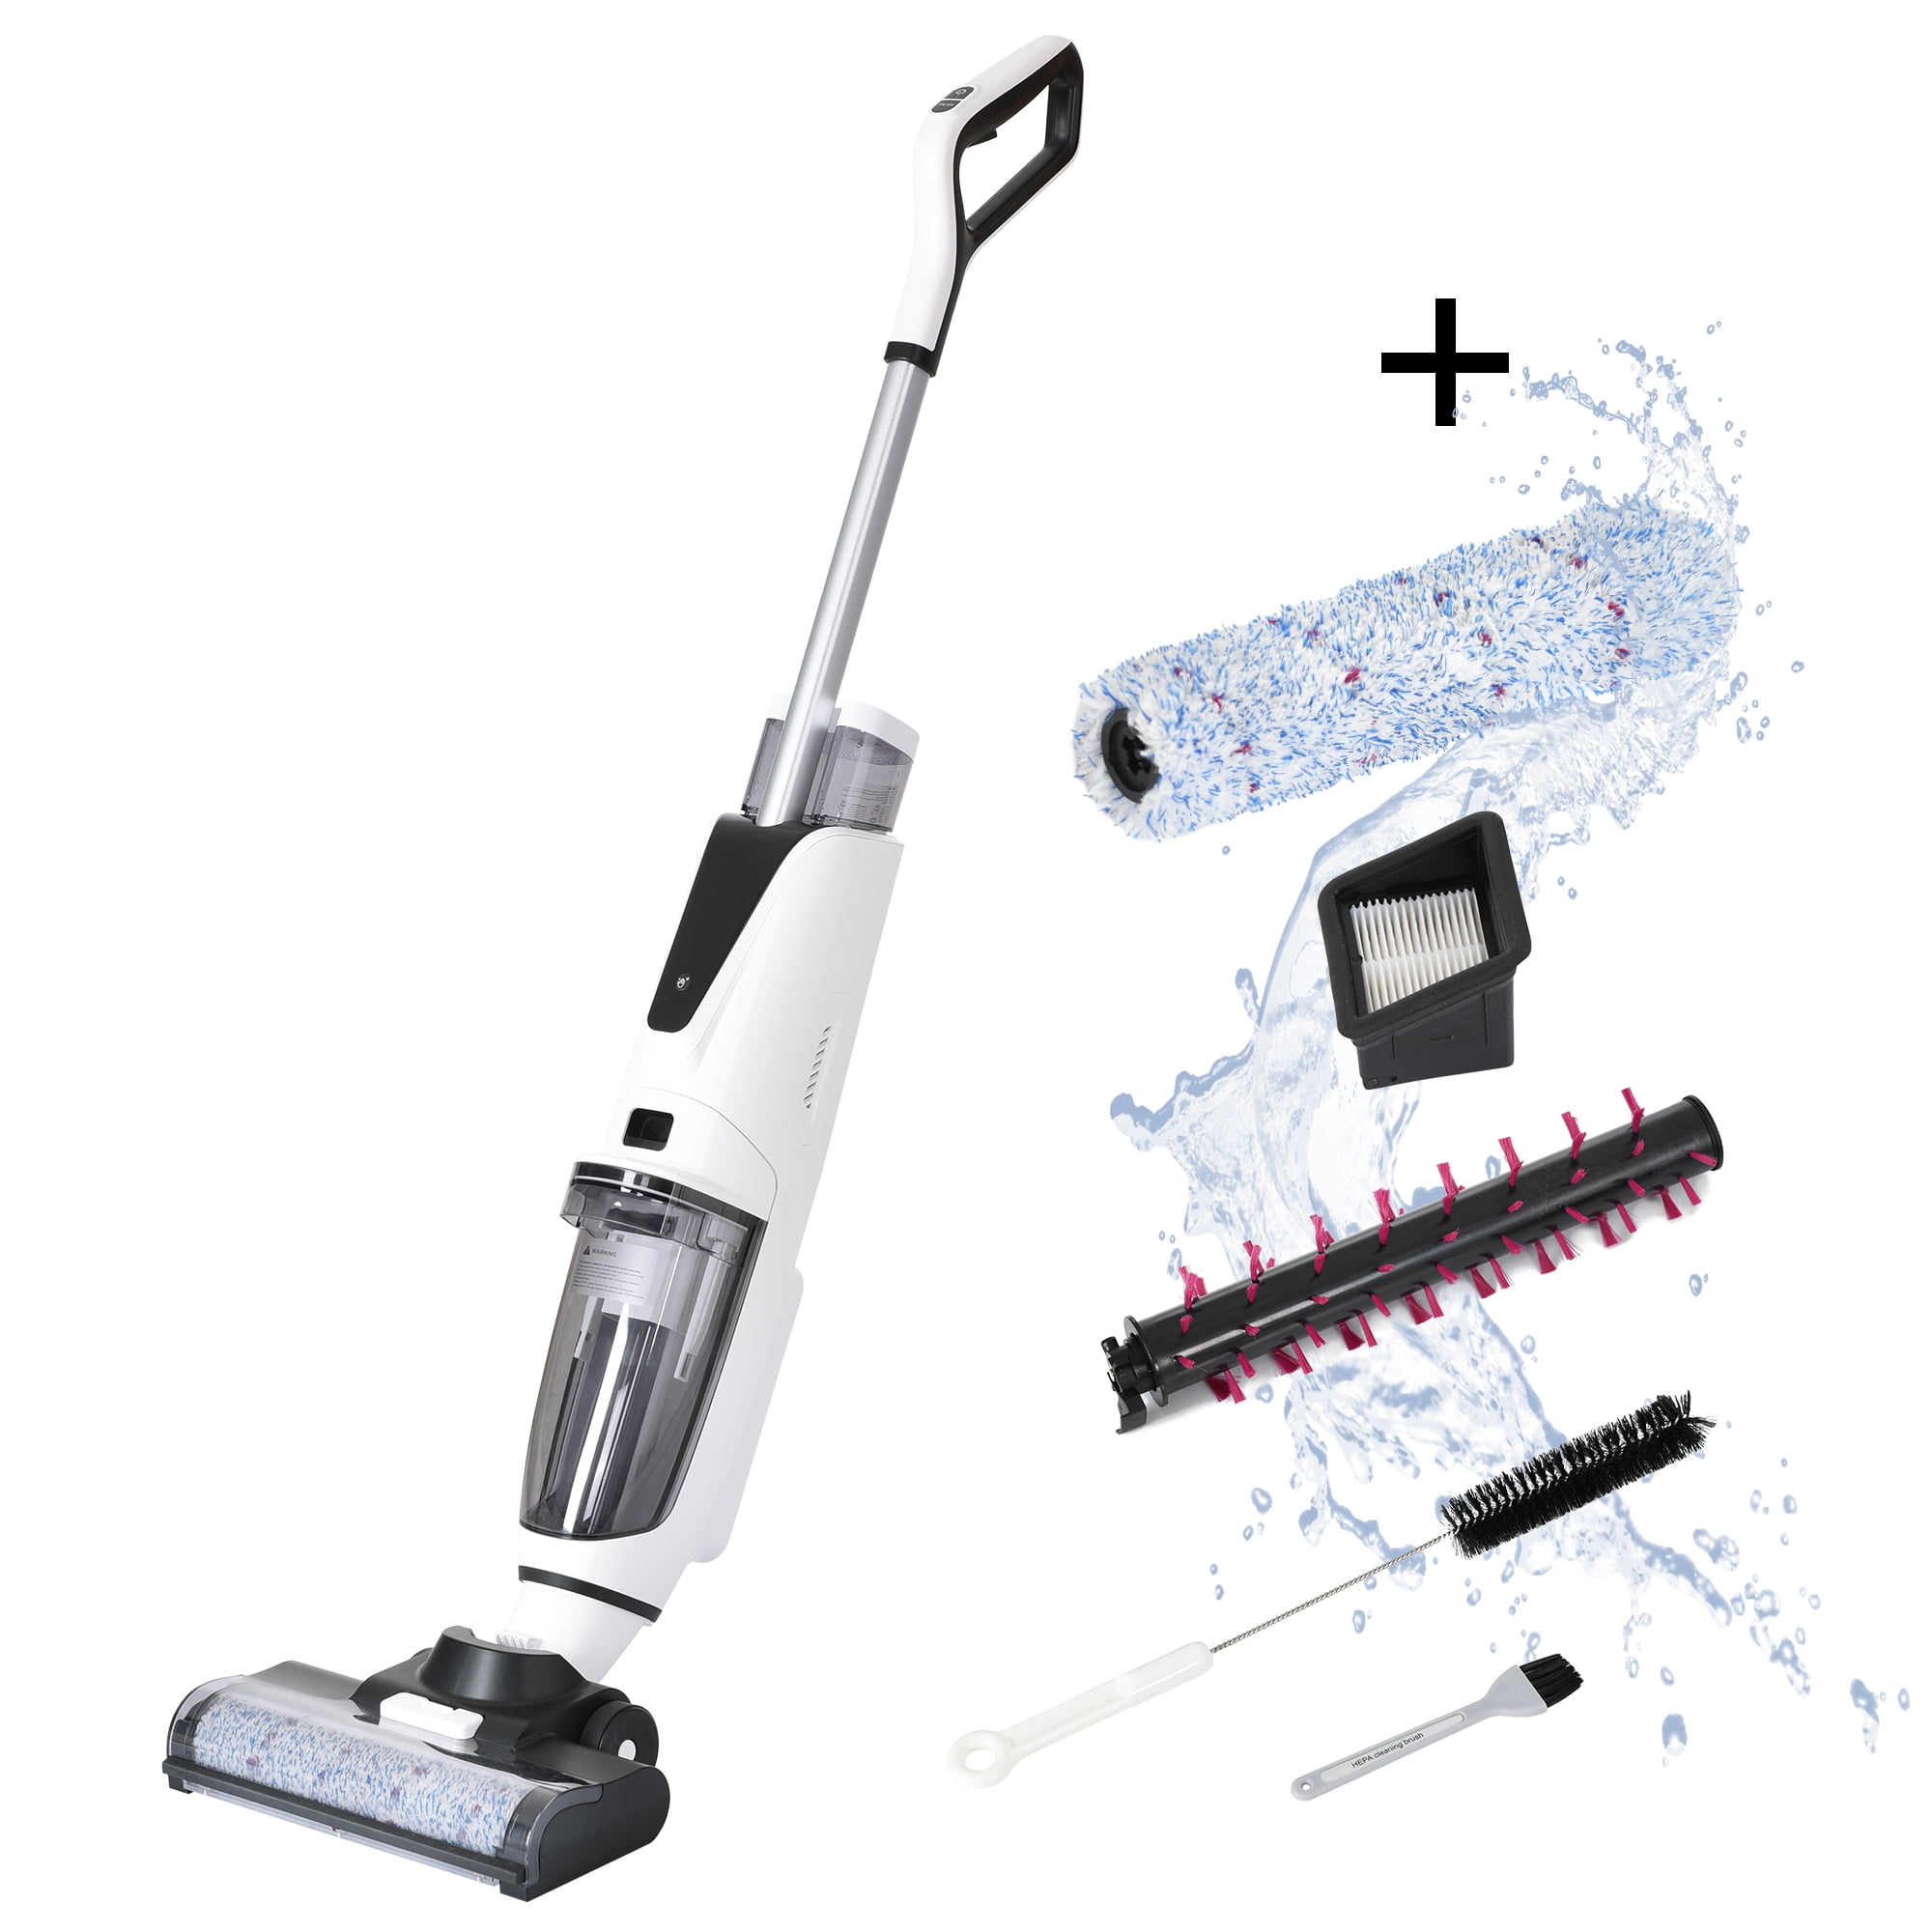 Details about   Carpet Shampooer Cleaner Machine Spot Cleaning Vacuum Wet Vac Professional NEW 